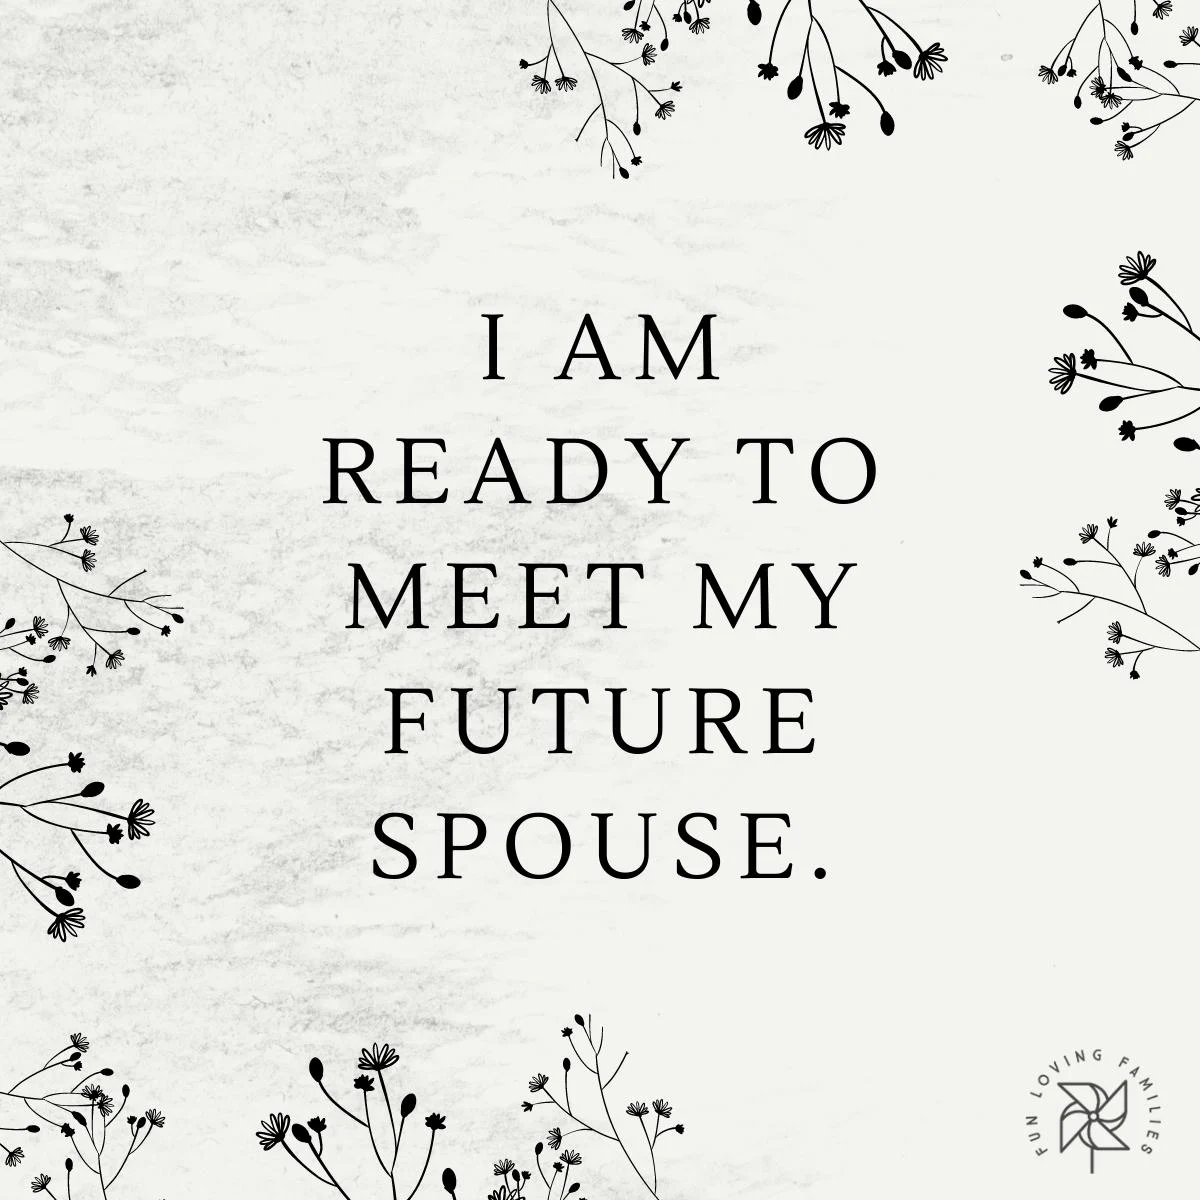 I am ready to meet my future spouse affirmation